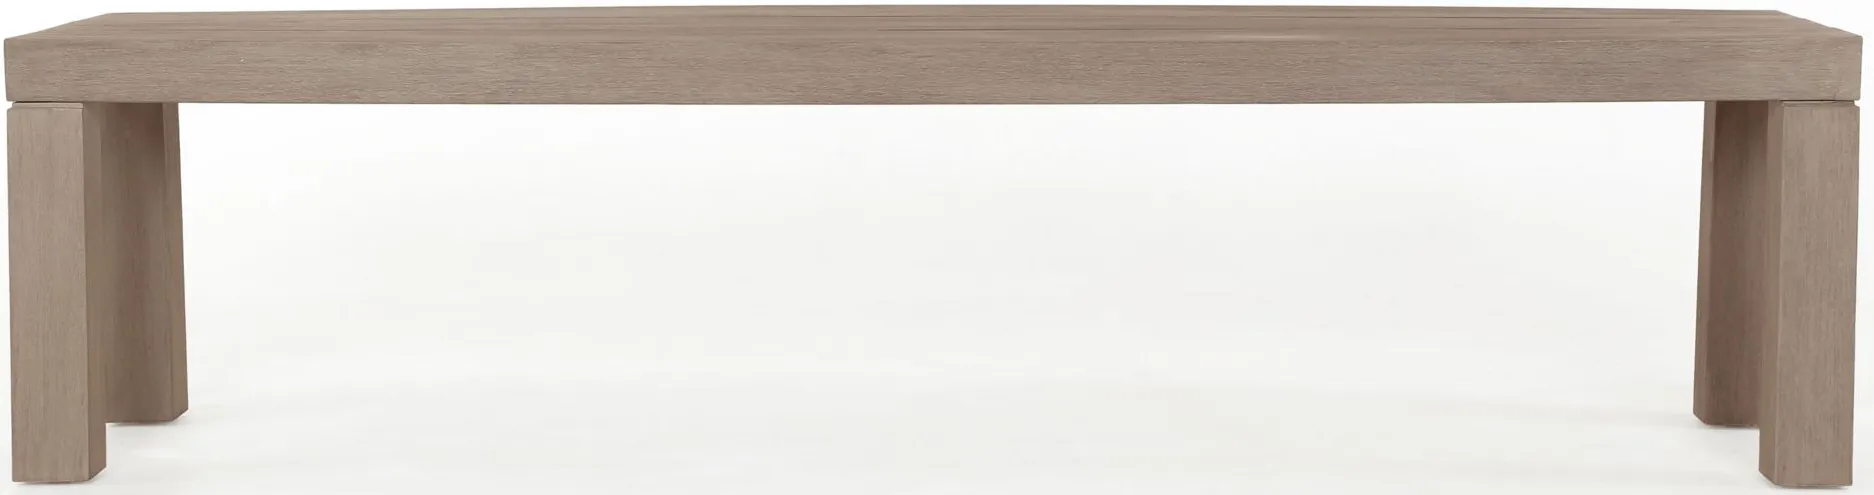 Sonora Outdoor Dining Bench in Washed Brown by Four Hands